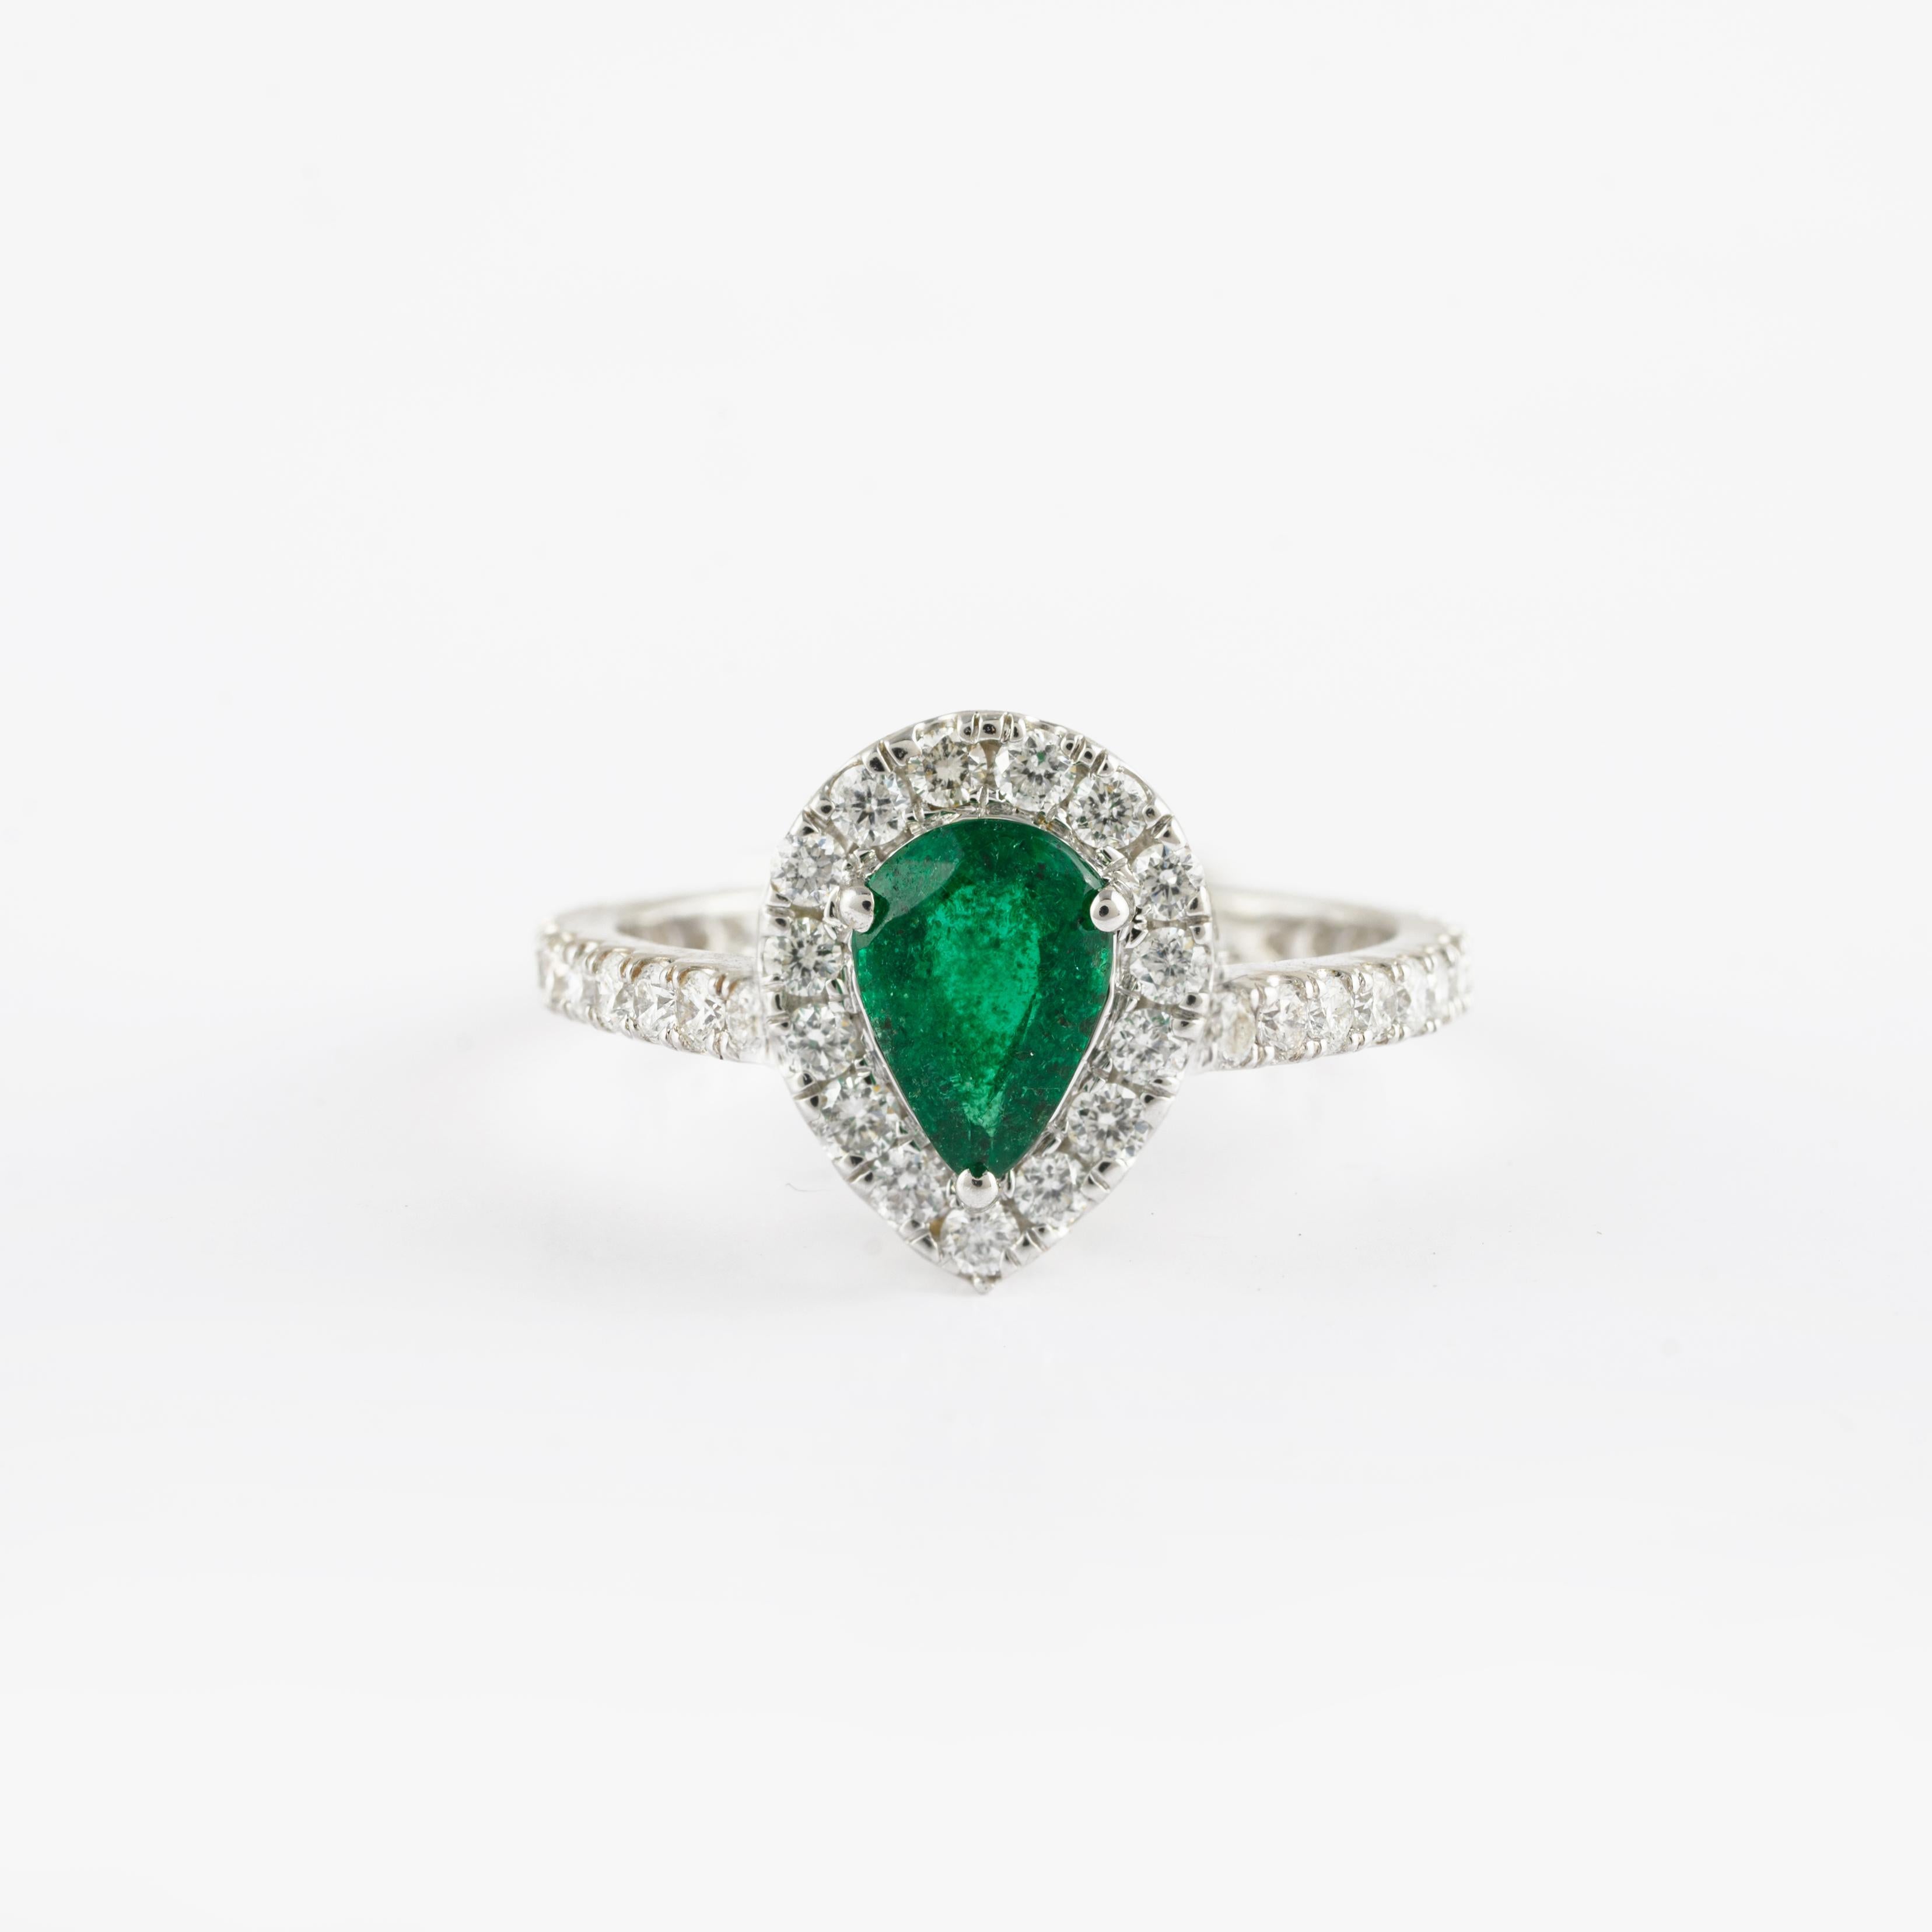 For Sale:  Exclusive 18k Solid White Gold Halo Diamond Natural Pear Cut Emerald Ring 2